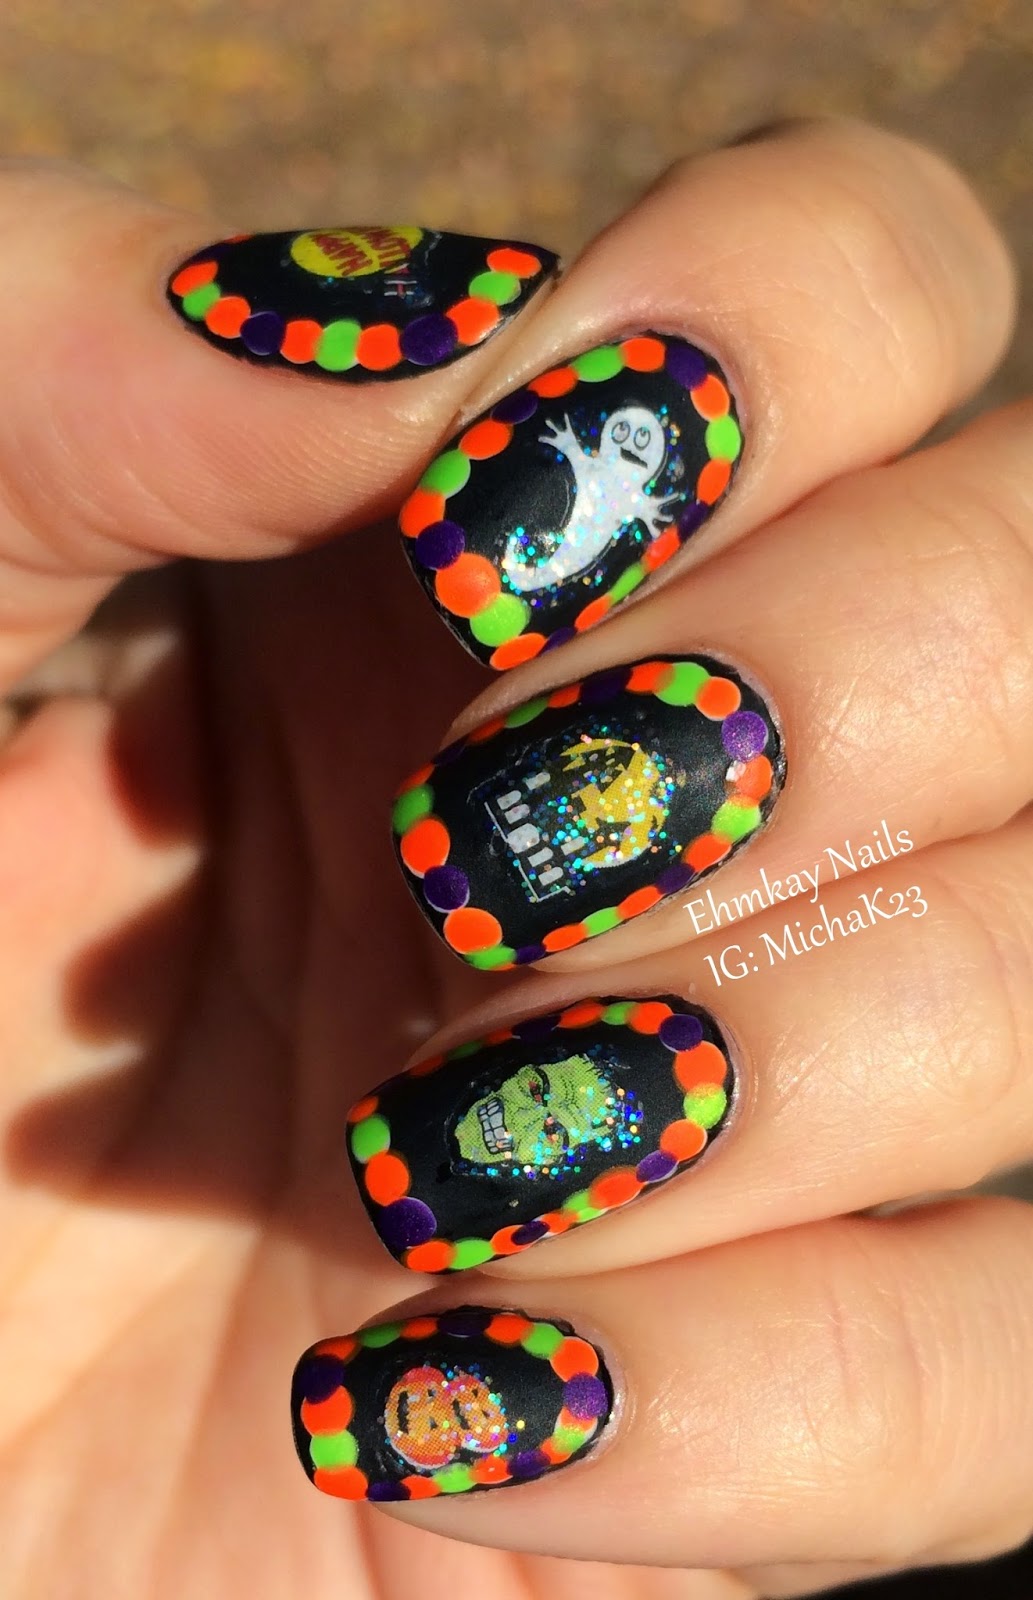 ehmkay nails: Halloween Framed Dotticure and Playing with Halloween Decals